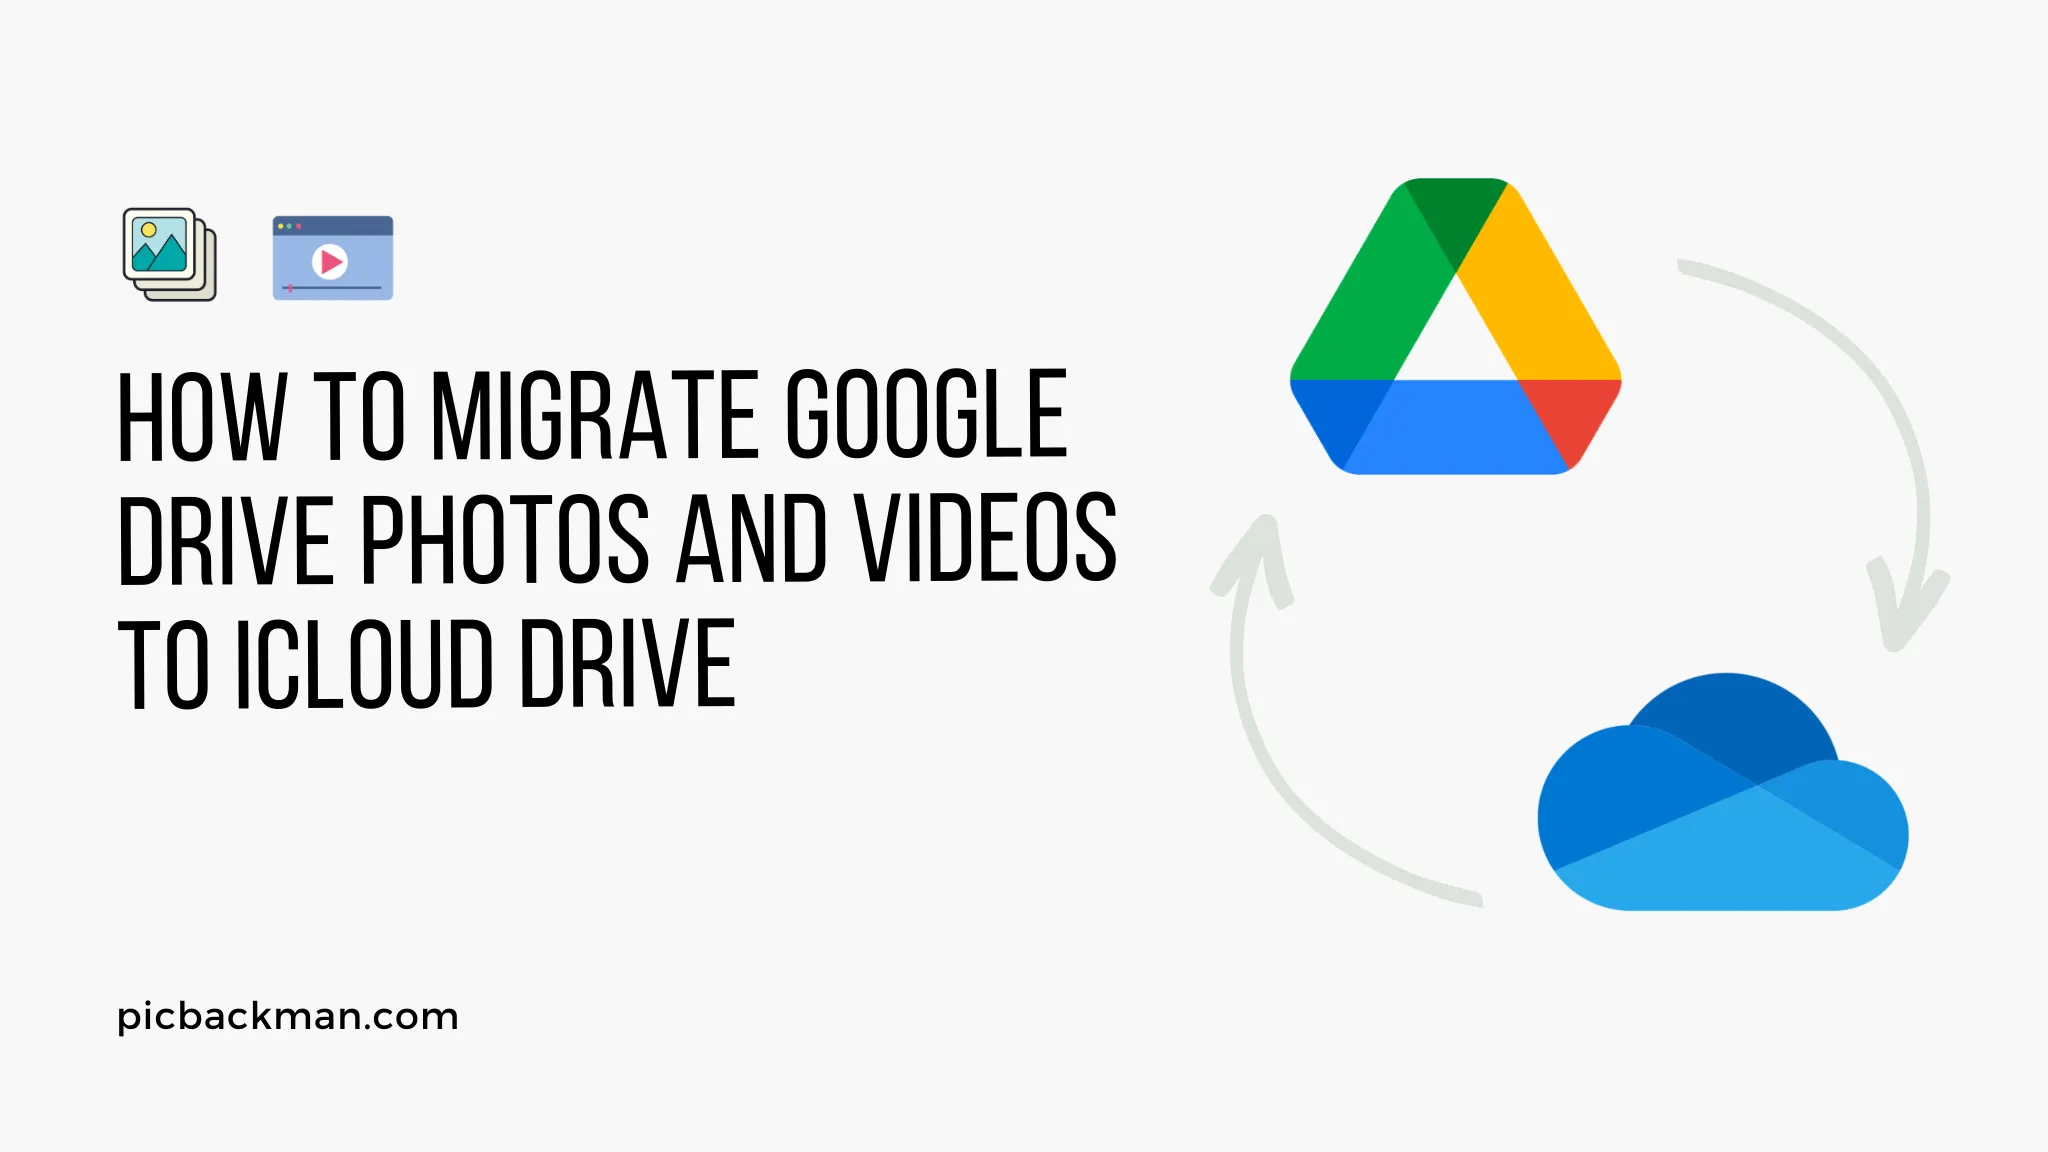 How to Migrate Google Drive Photos and Videos to iCloud Drive?